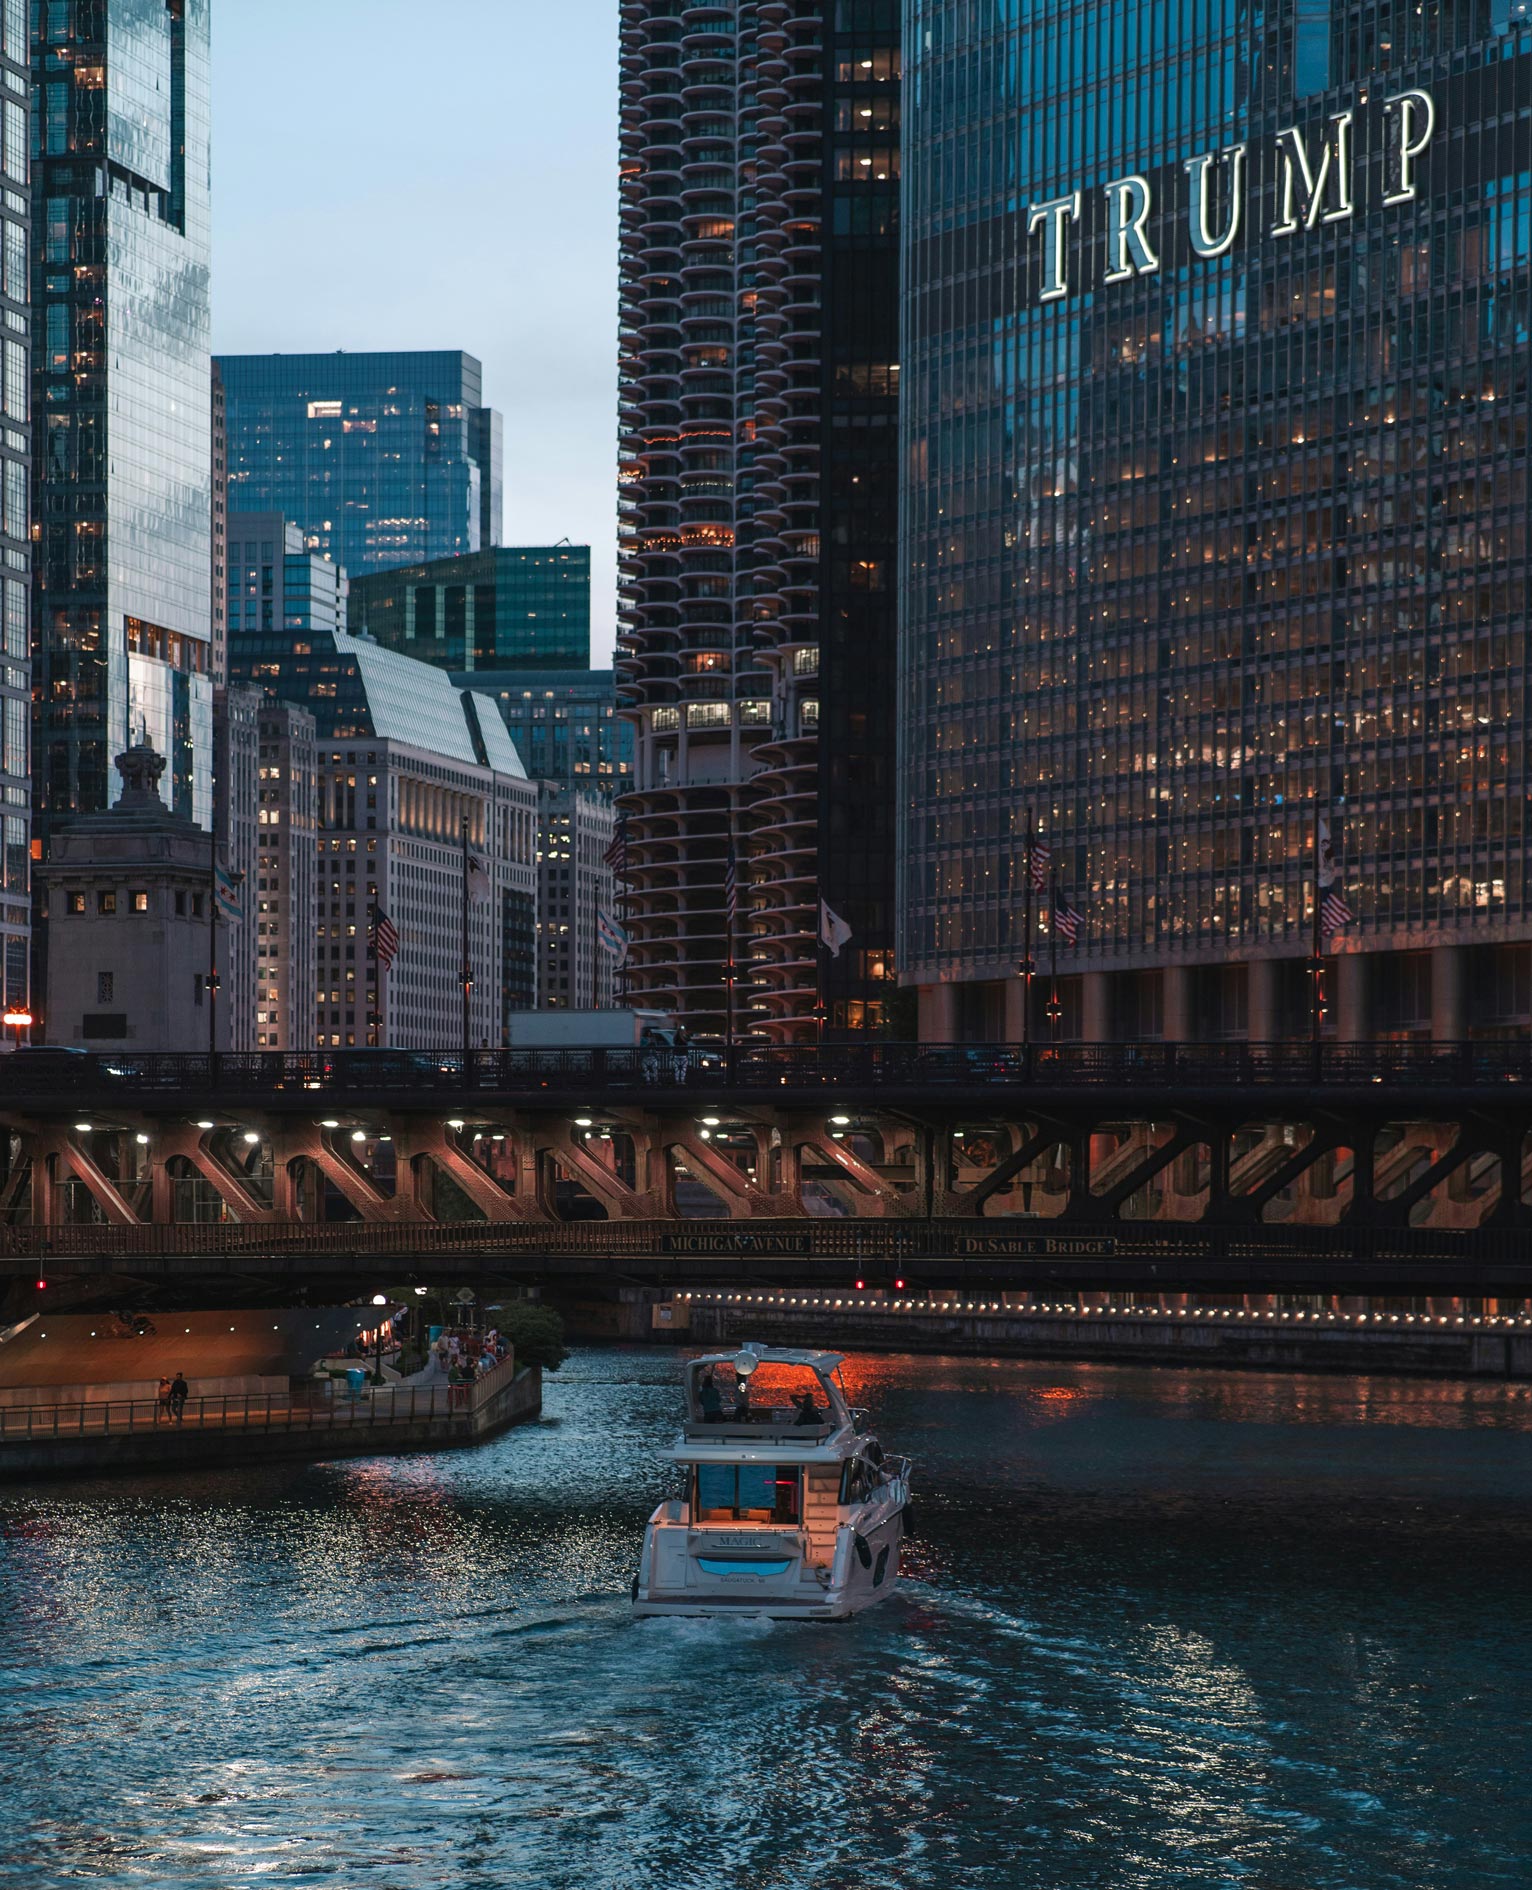 Trump Tower in Chicago, USA. Image via Mike Cox / unsplash.